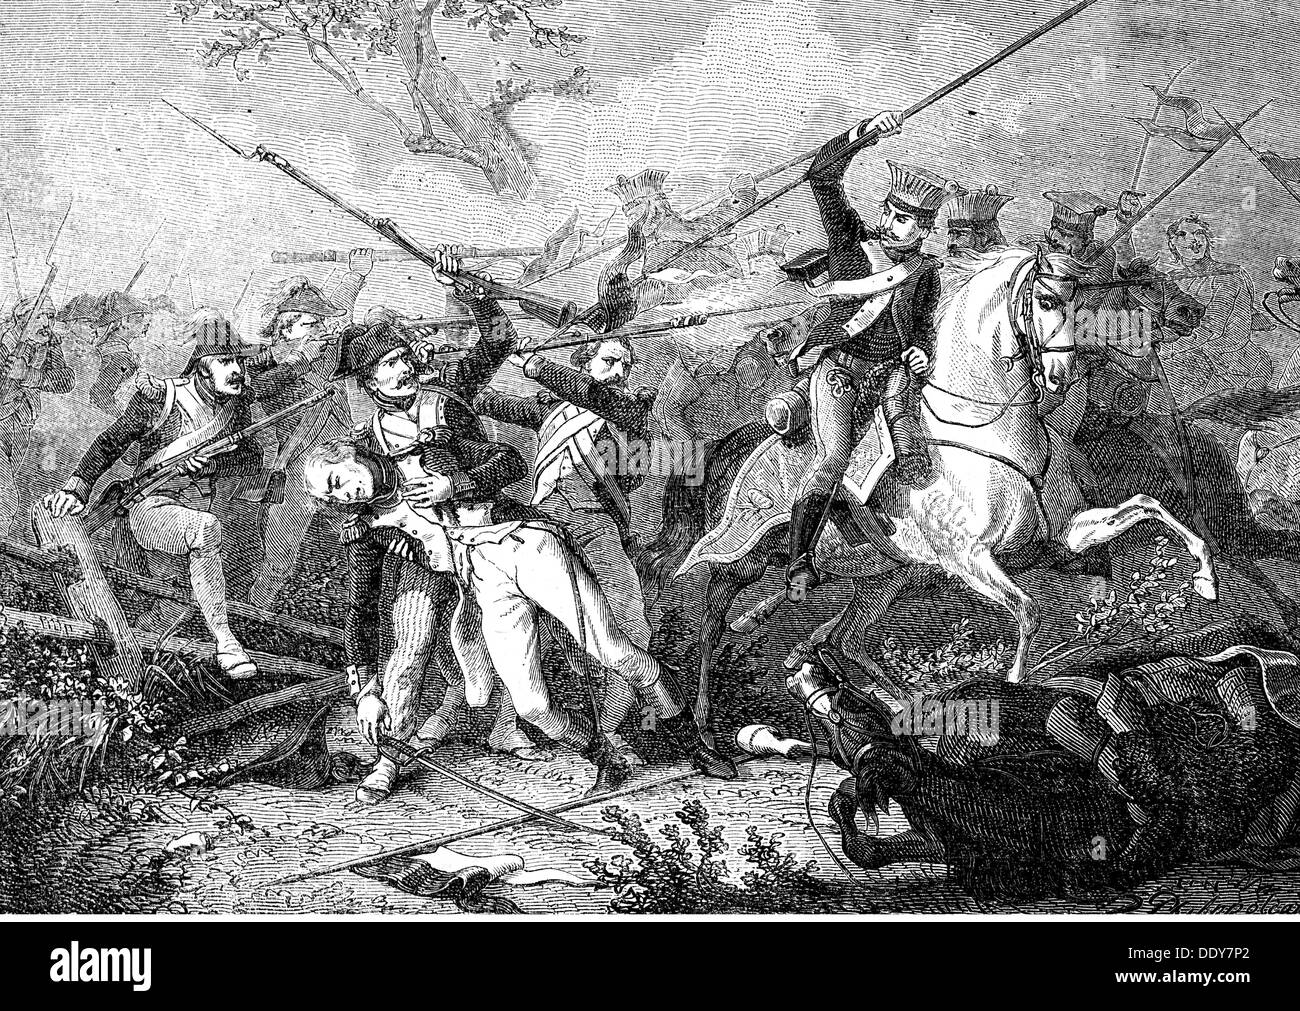 War of the Second Coalition 1798 - 1802, skirmish at Oberhausen, 27.6.1800, death of captain Corret de la Tour d'Auvergne, wood engraving, 19th century, soldiers, soldier, officer, officers, French, infantry, French private, Austrian, Austrian lancers, cavalry, cavalries, Germany, electorate Bavaria, Electorate Palatinate-Bavaria, Electoral Palatinate - Bavaria, Upper Bavaria, Revolutionary Wars, revolution wars, men, man, male, people, Auvergne, 18th century, second, 2nd, skirmish, captain, captains, historic, historical, Additional-Rights-Clearences-Not Available Stock Photo